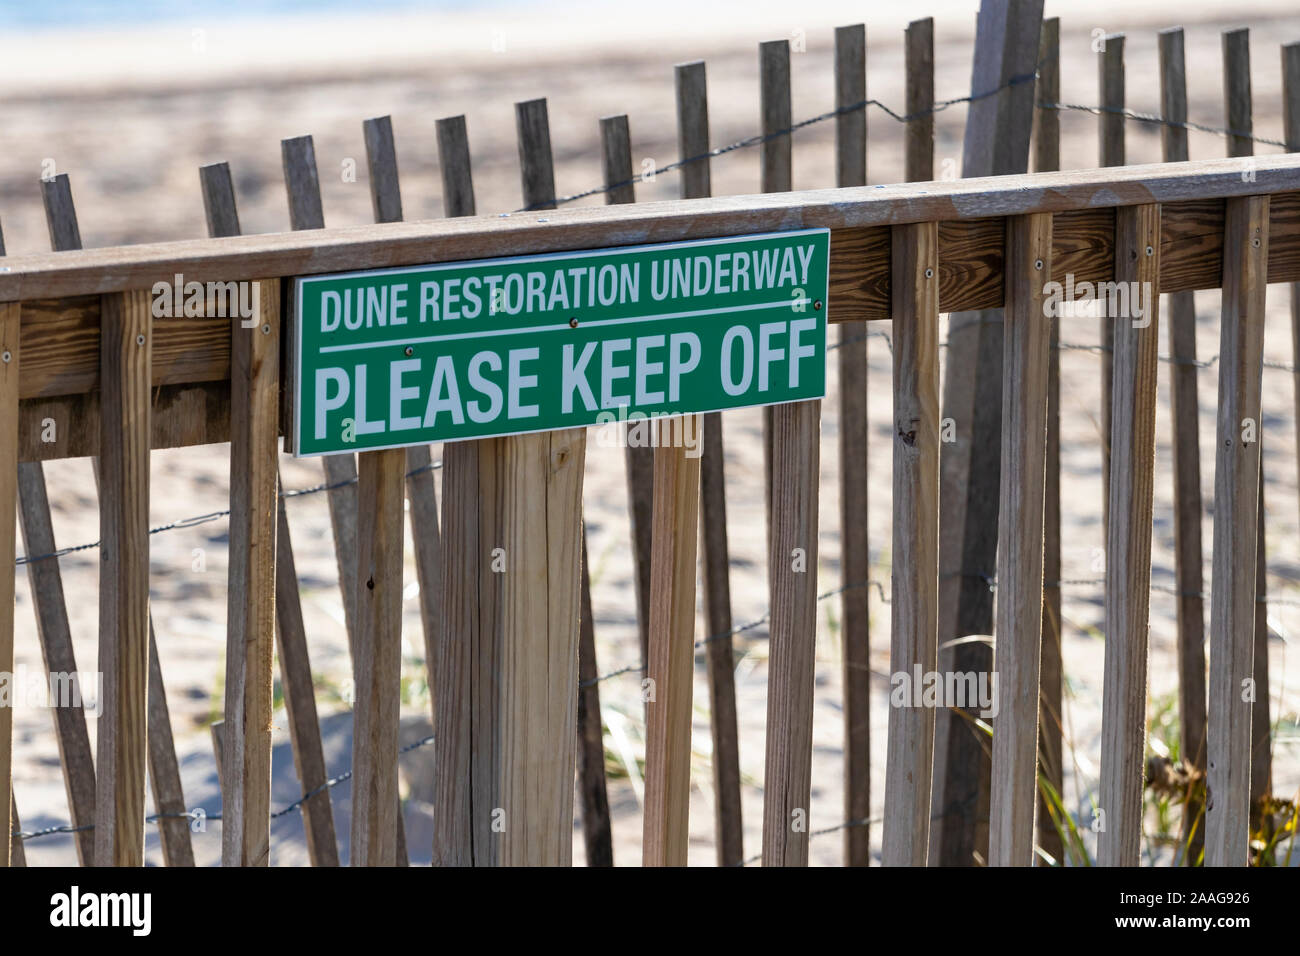 Green sign at beach reads: 'DUNE RESTORATION UNDERWAY - PLEASE KEEP OFF' Stock Photo